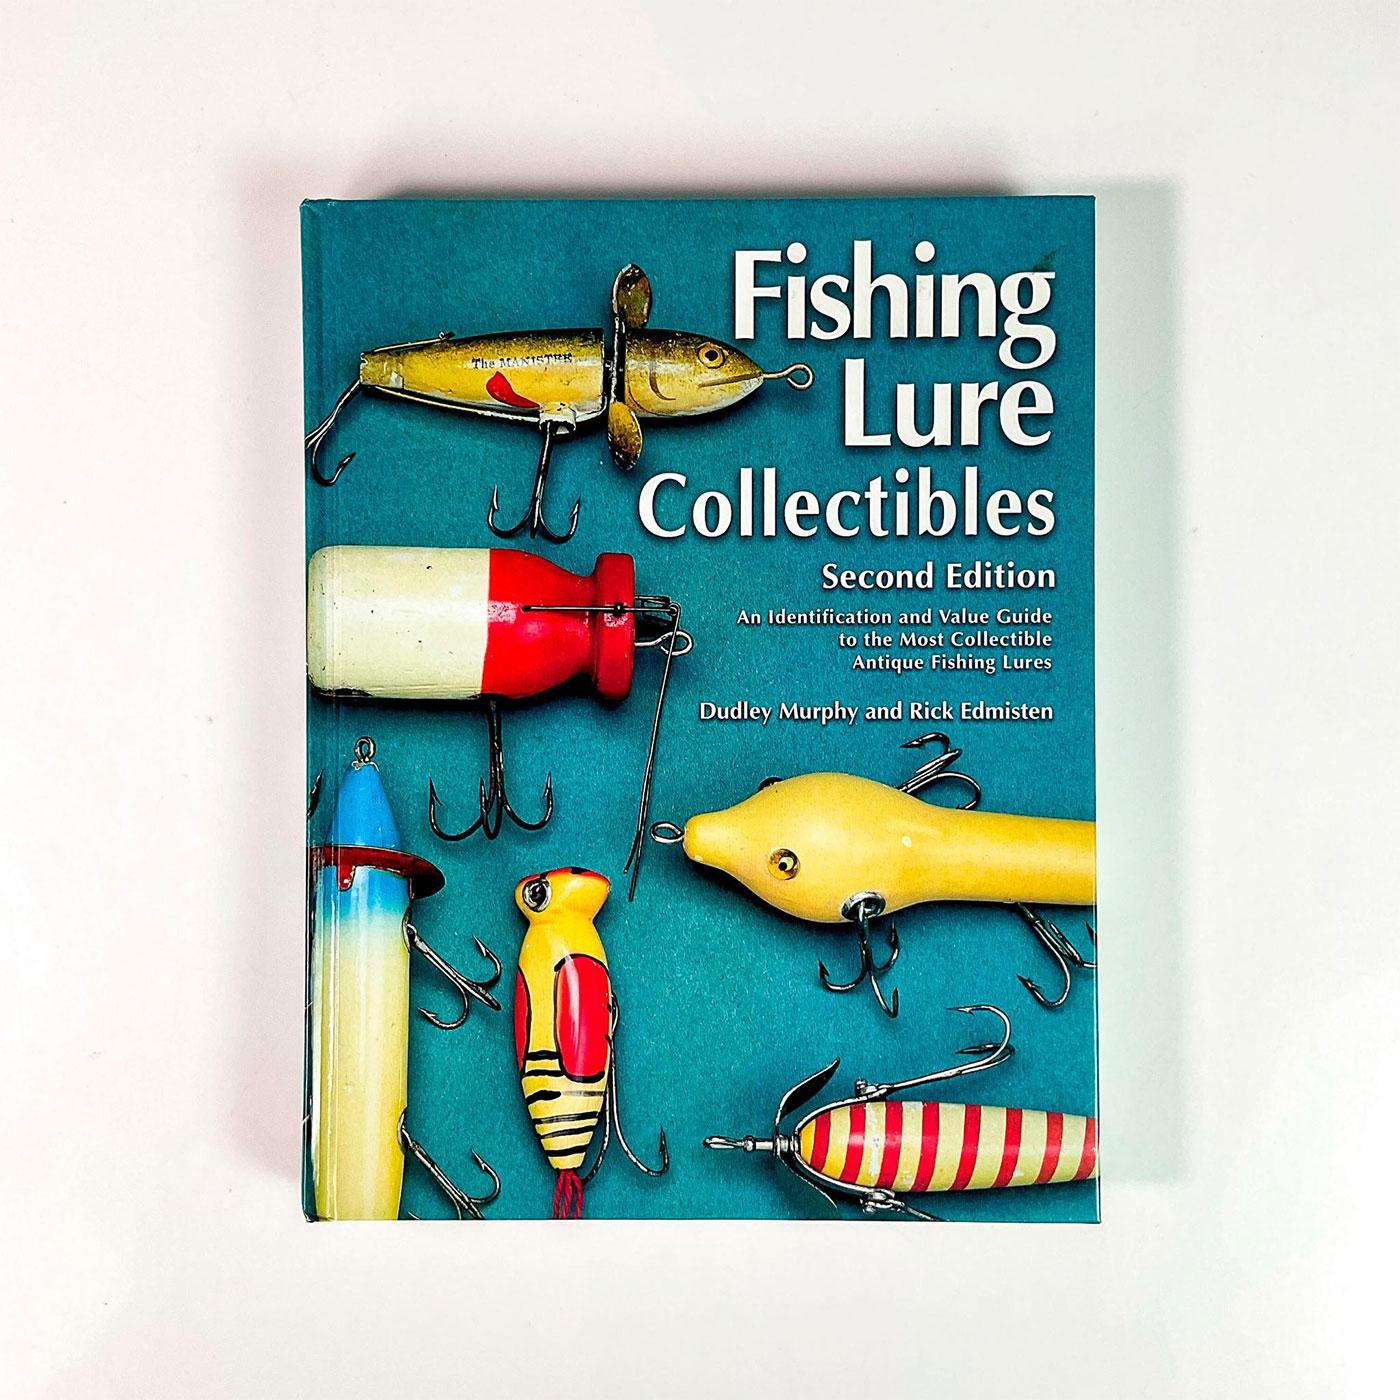 Volume 1 Fishing Lure Collectibles Book